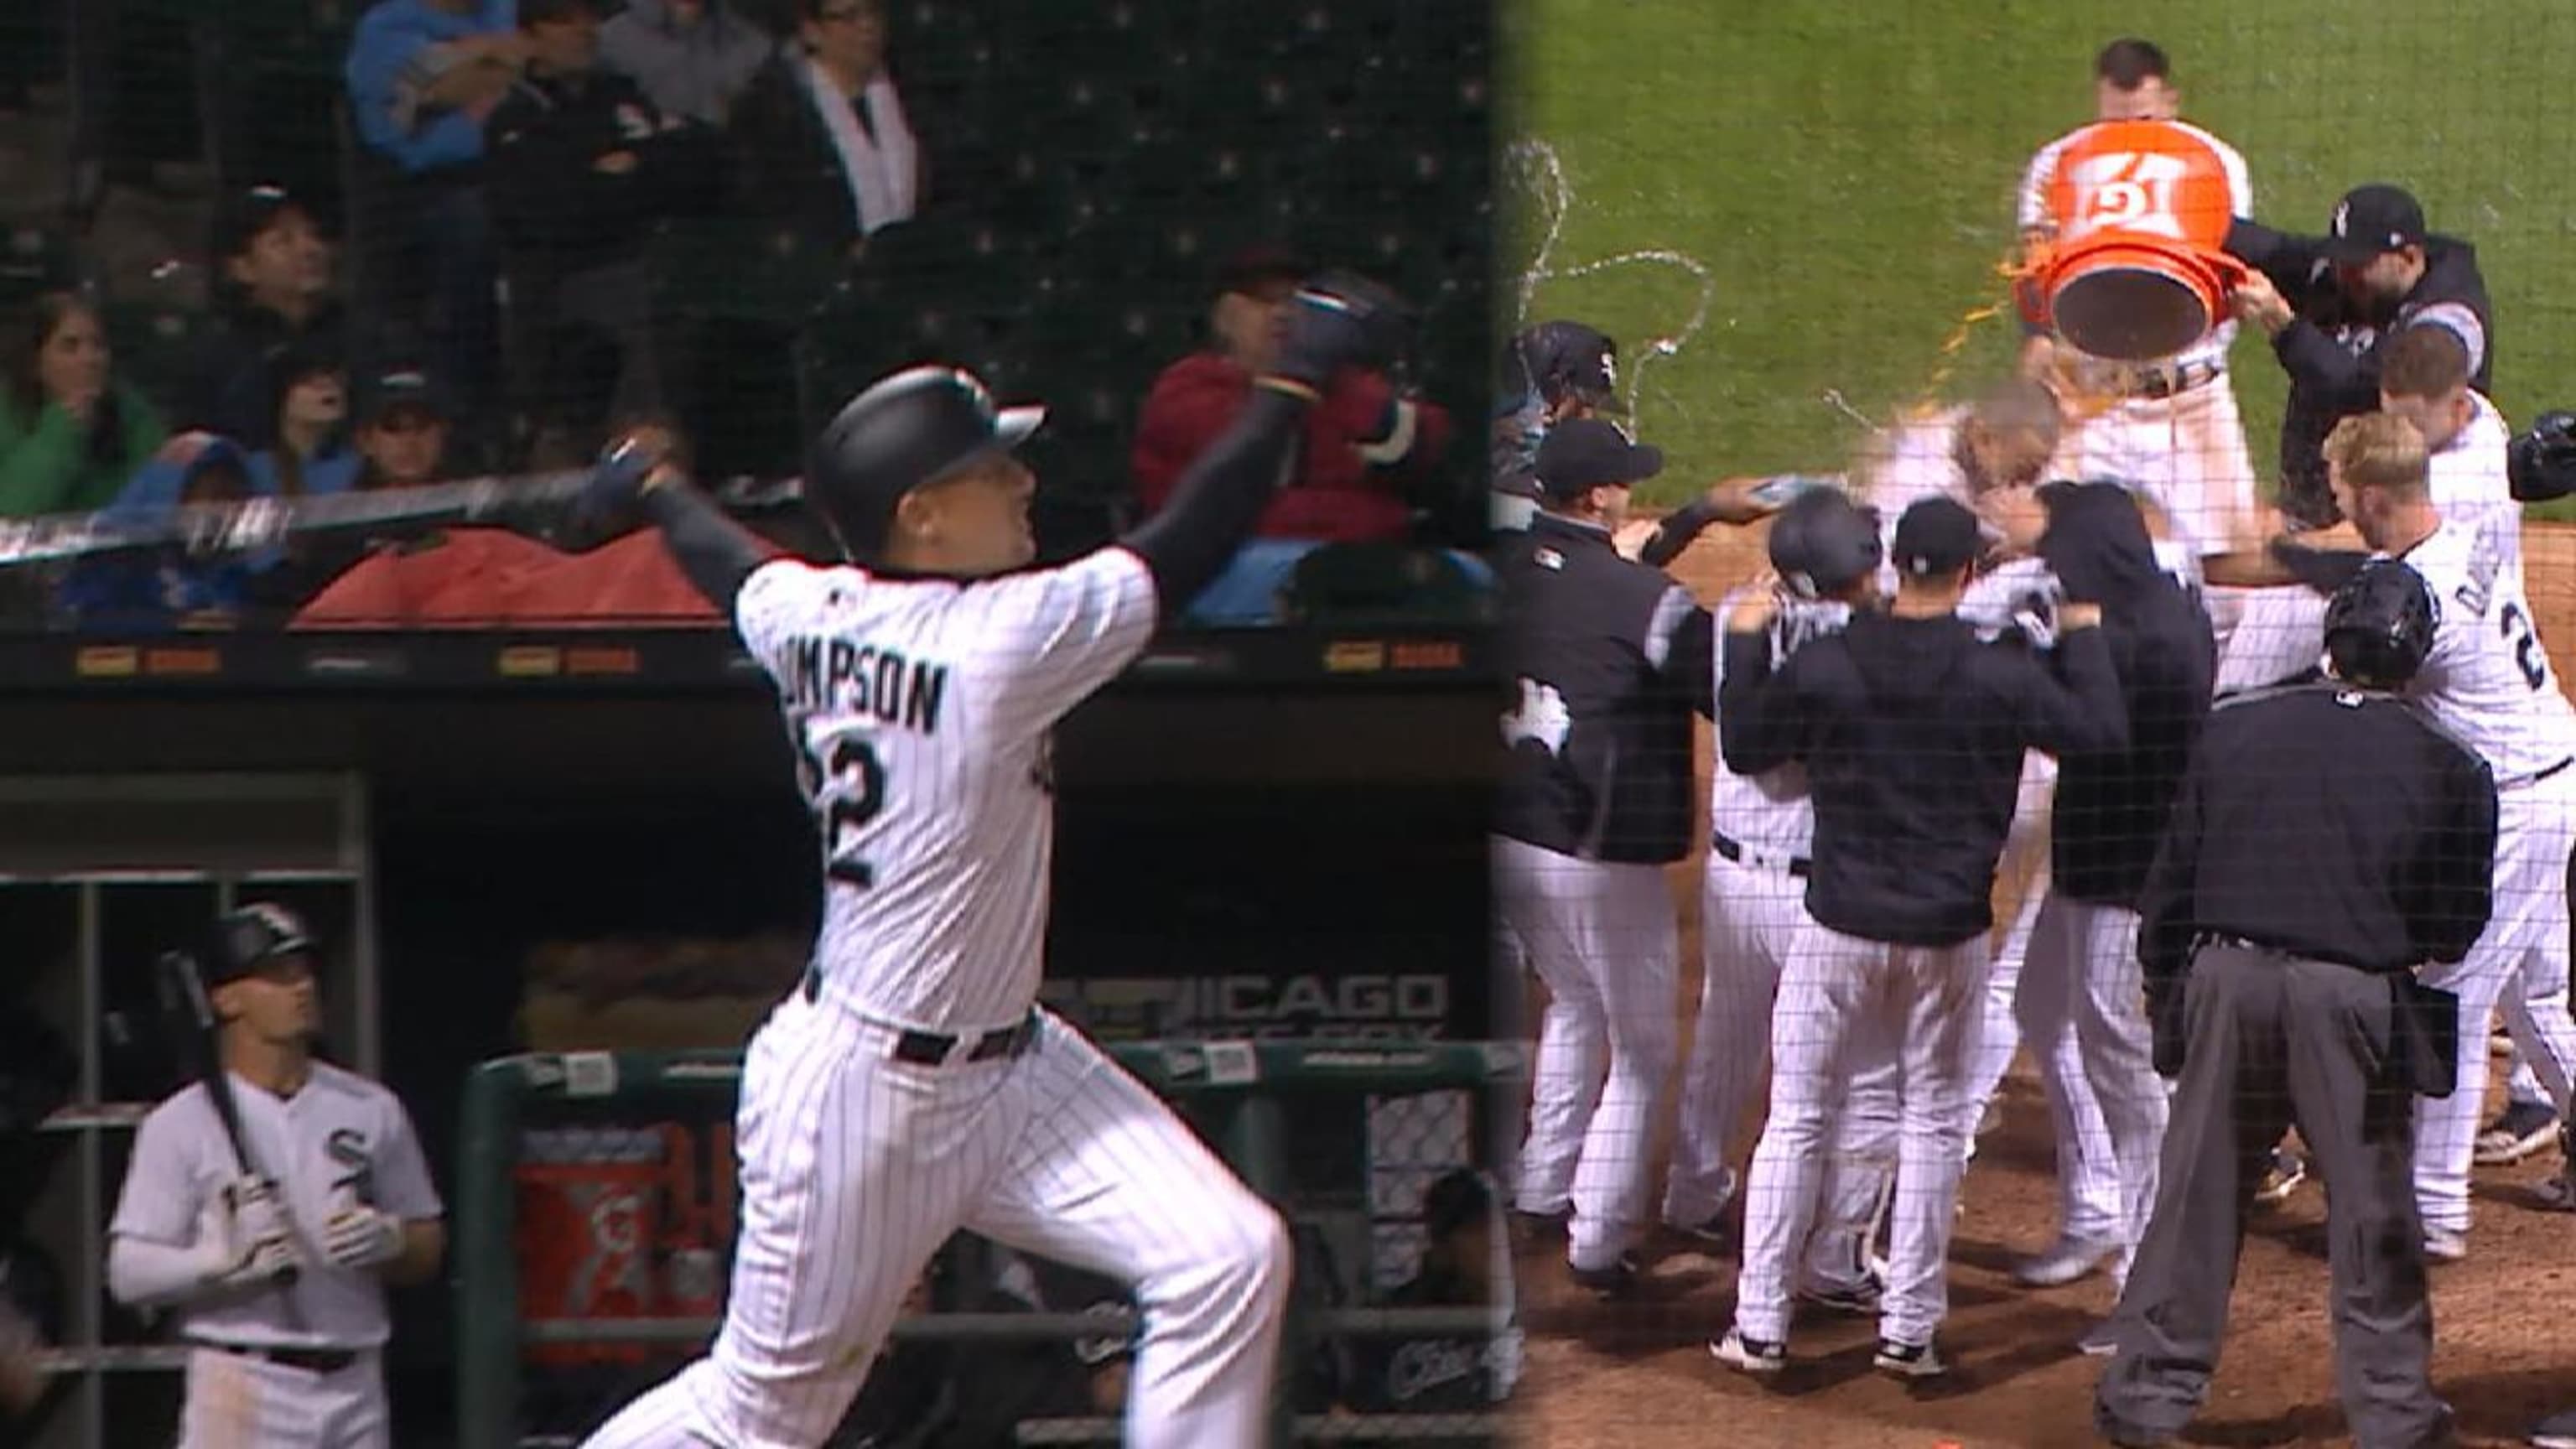 WATCH: Morel blasts walk-off homer against White Sox, rips off jersey